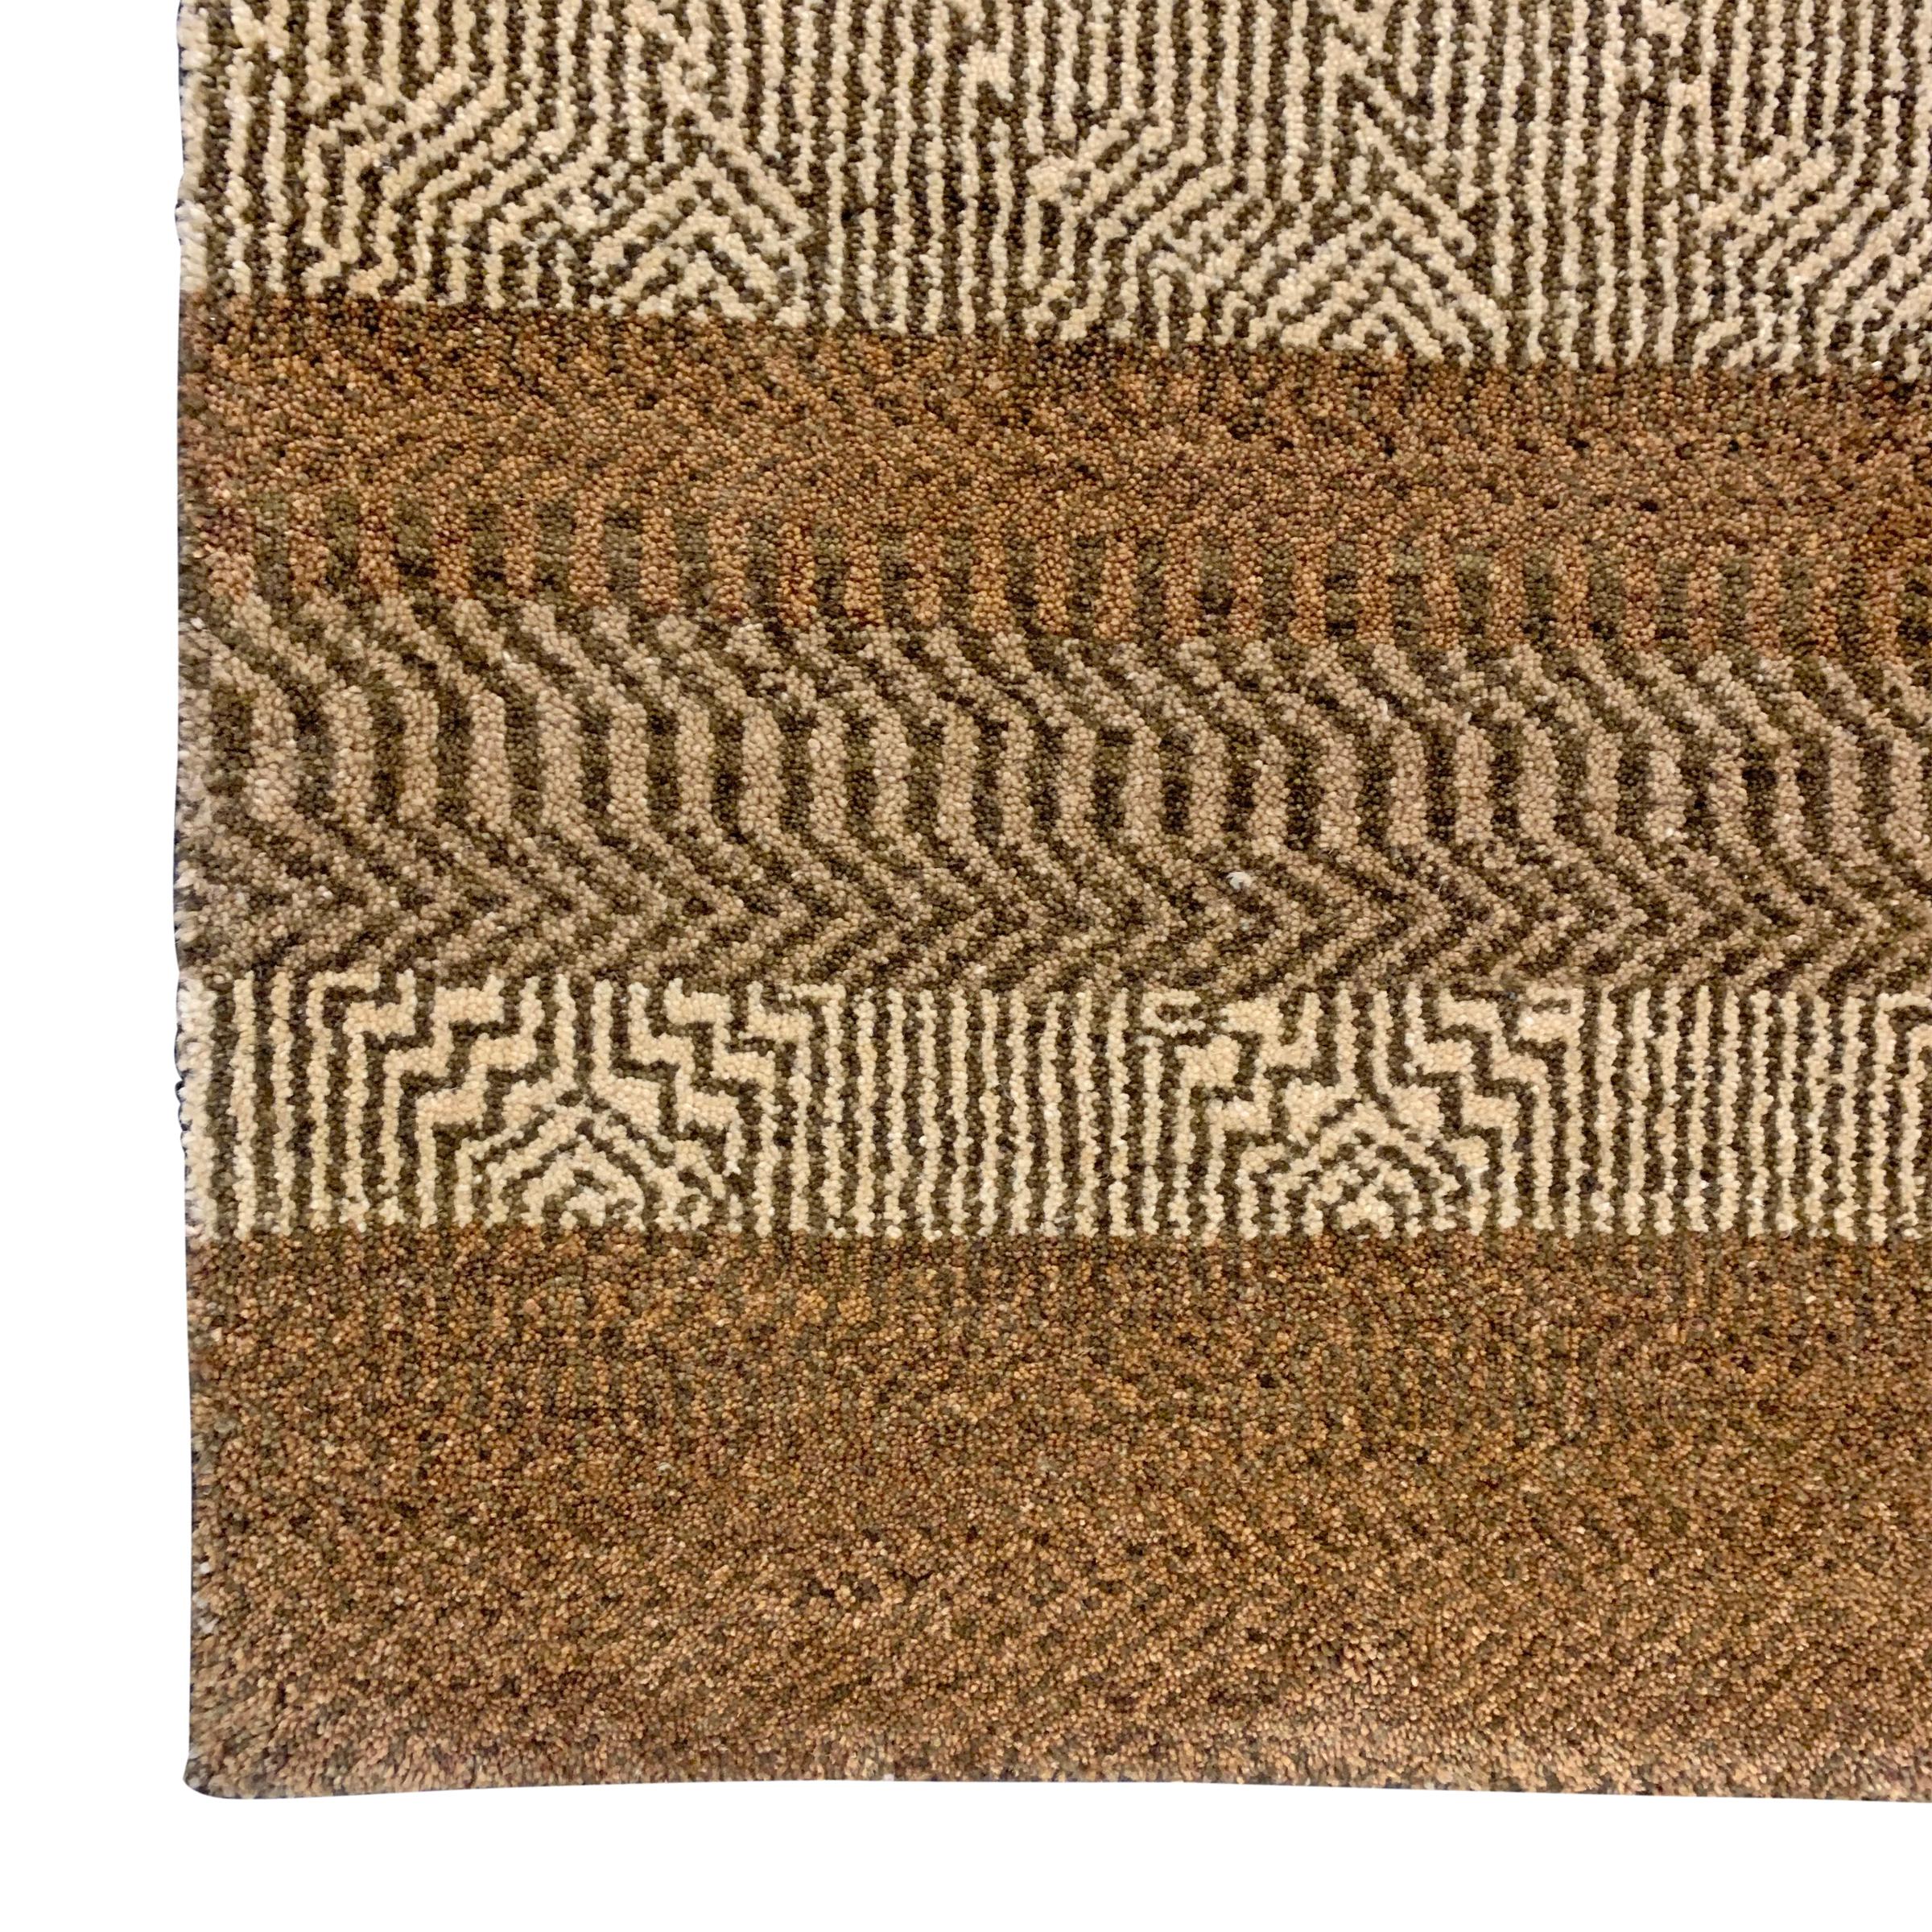 Indian Contemporary Rug with a Tribal Pattern